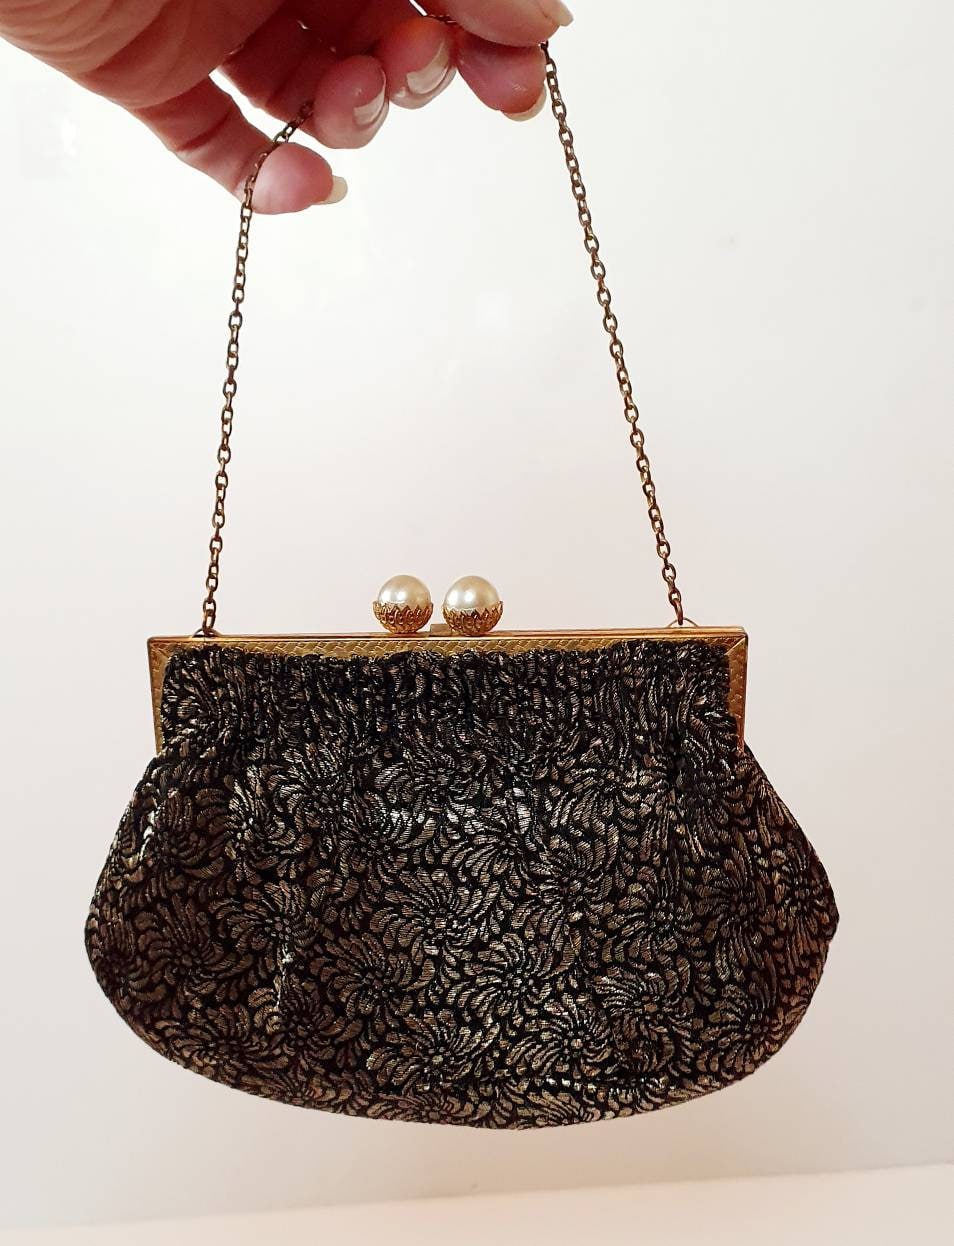 Twenties Black and Gold Evening Bag Brocade Made in France 